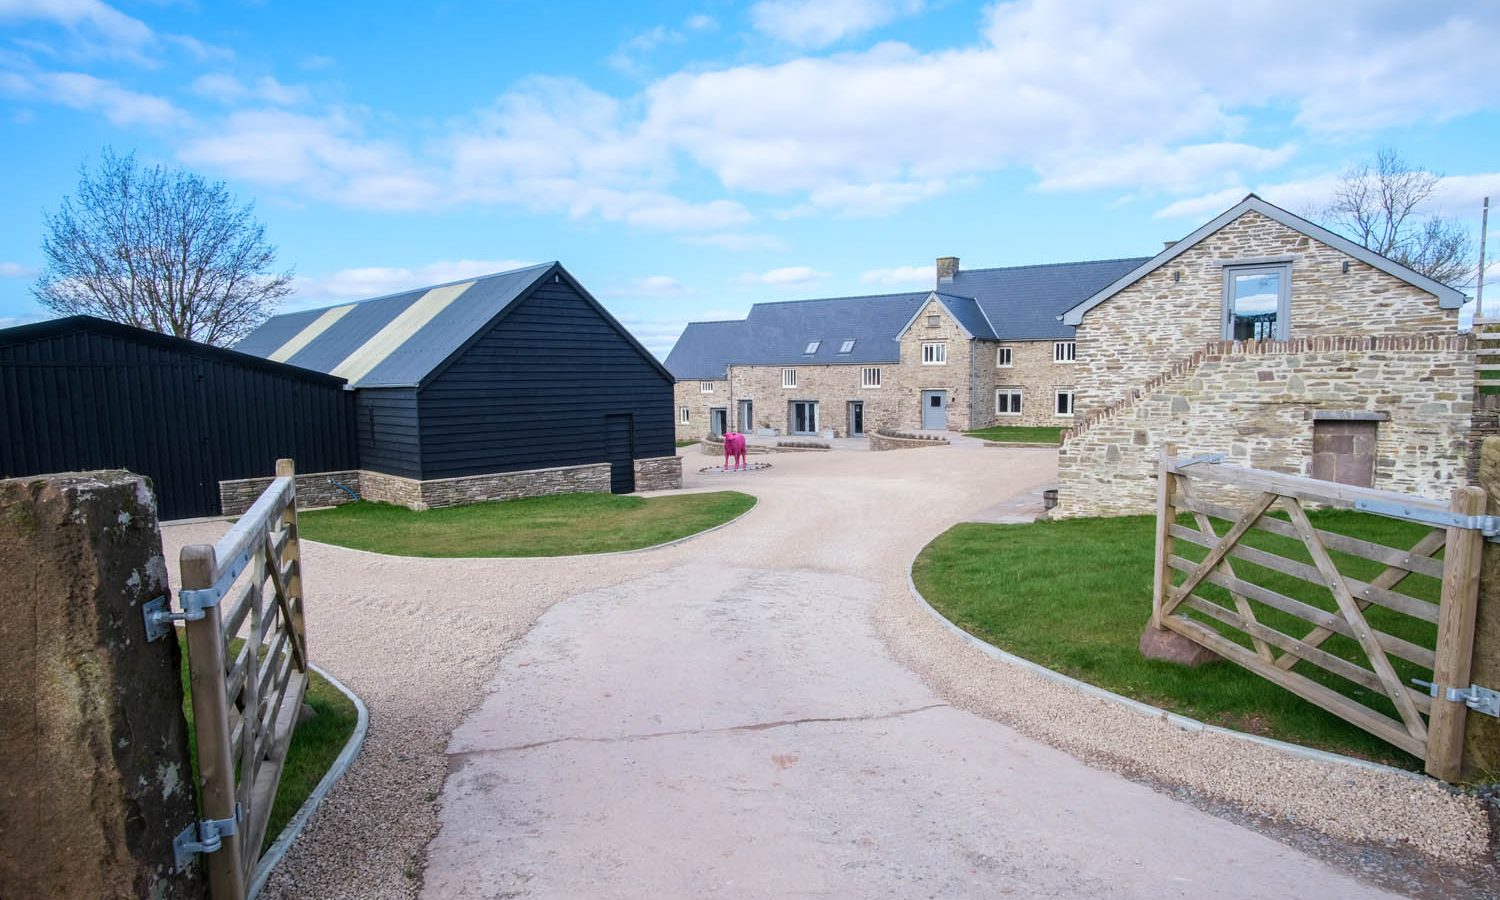  The Wholehouse - kate & tom's Large Holiday Homes